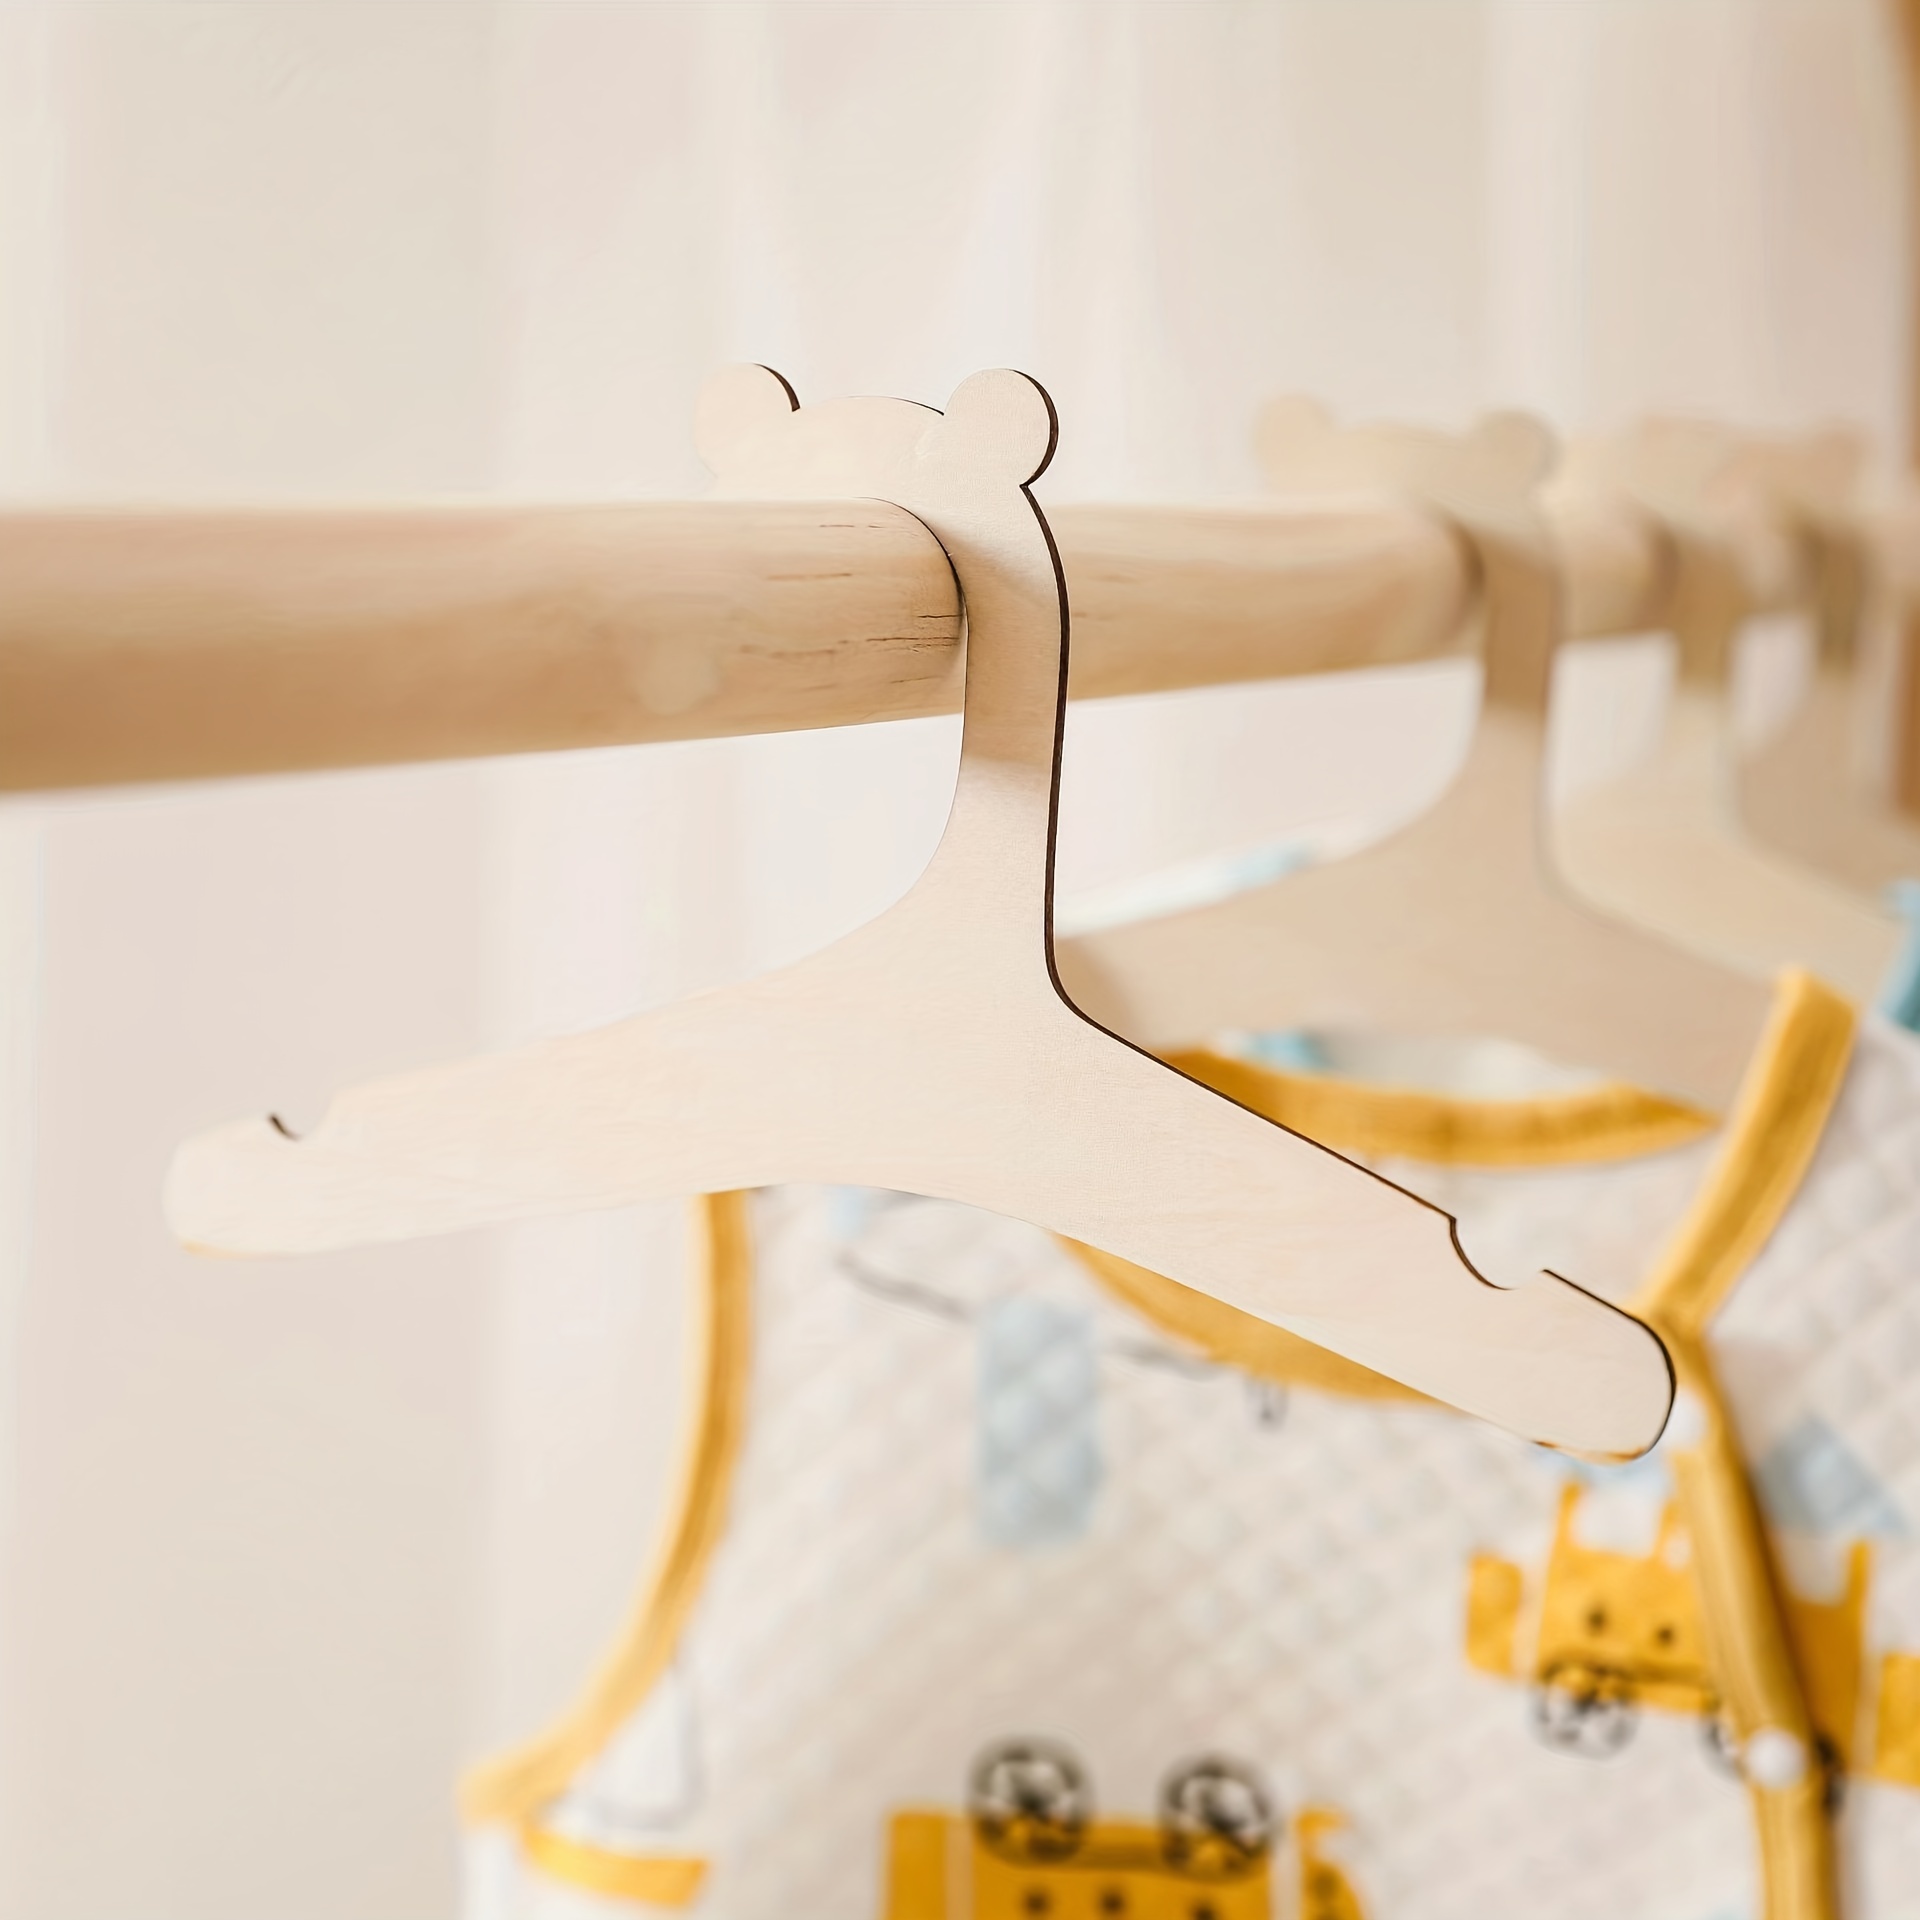 5-50pcs Small Home Non-Slip Kids Baby Clothing Hangers for Wet and